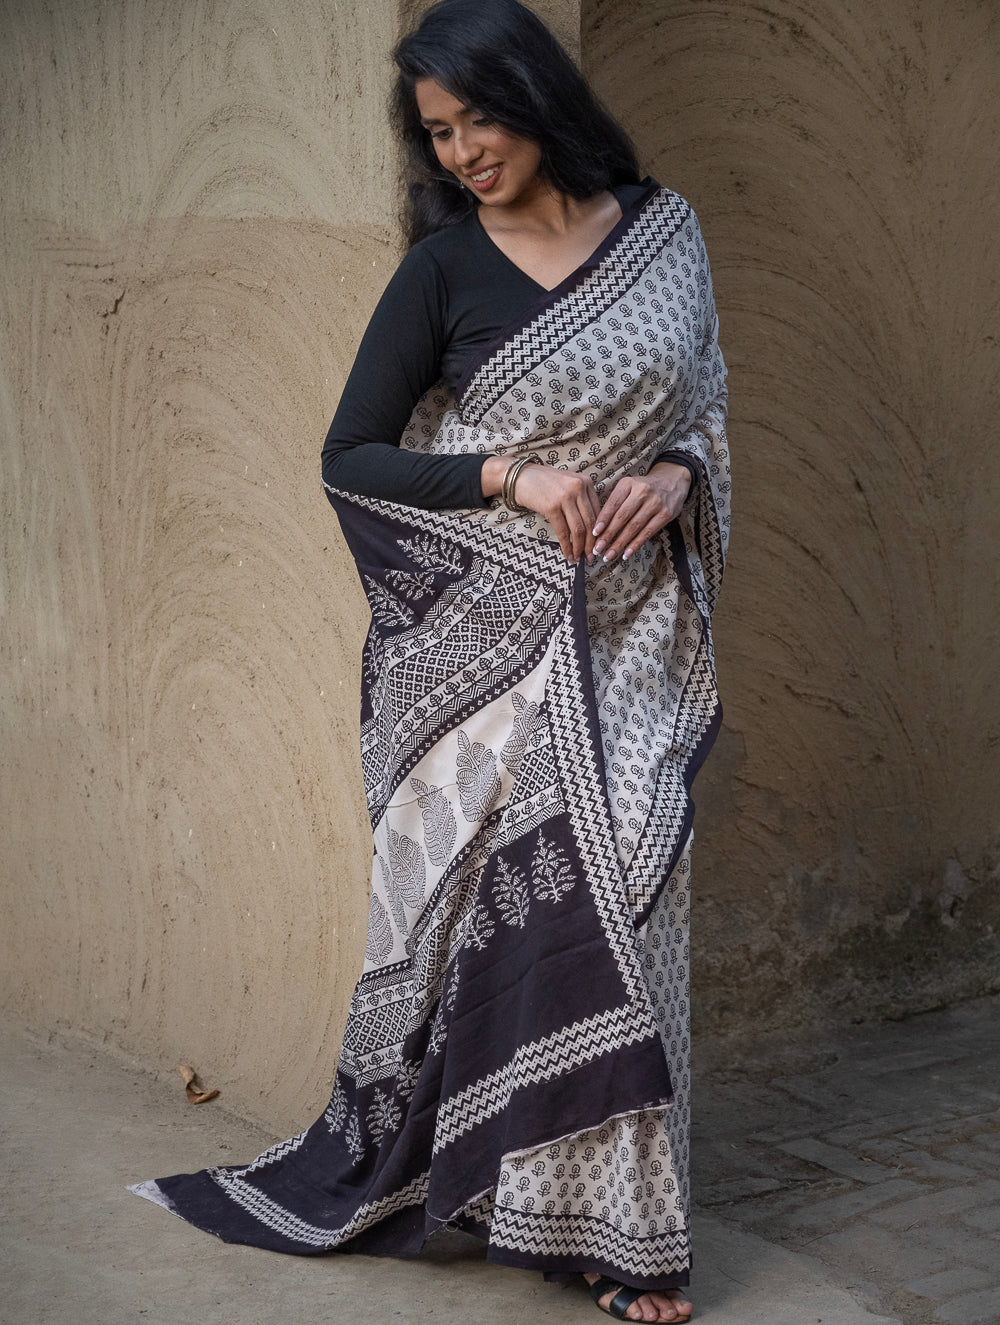 Load image into Gallery viewer, Exclusive Bagh Hand Block Printed Cotton Saree - Floral Geometry